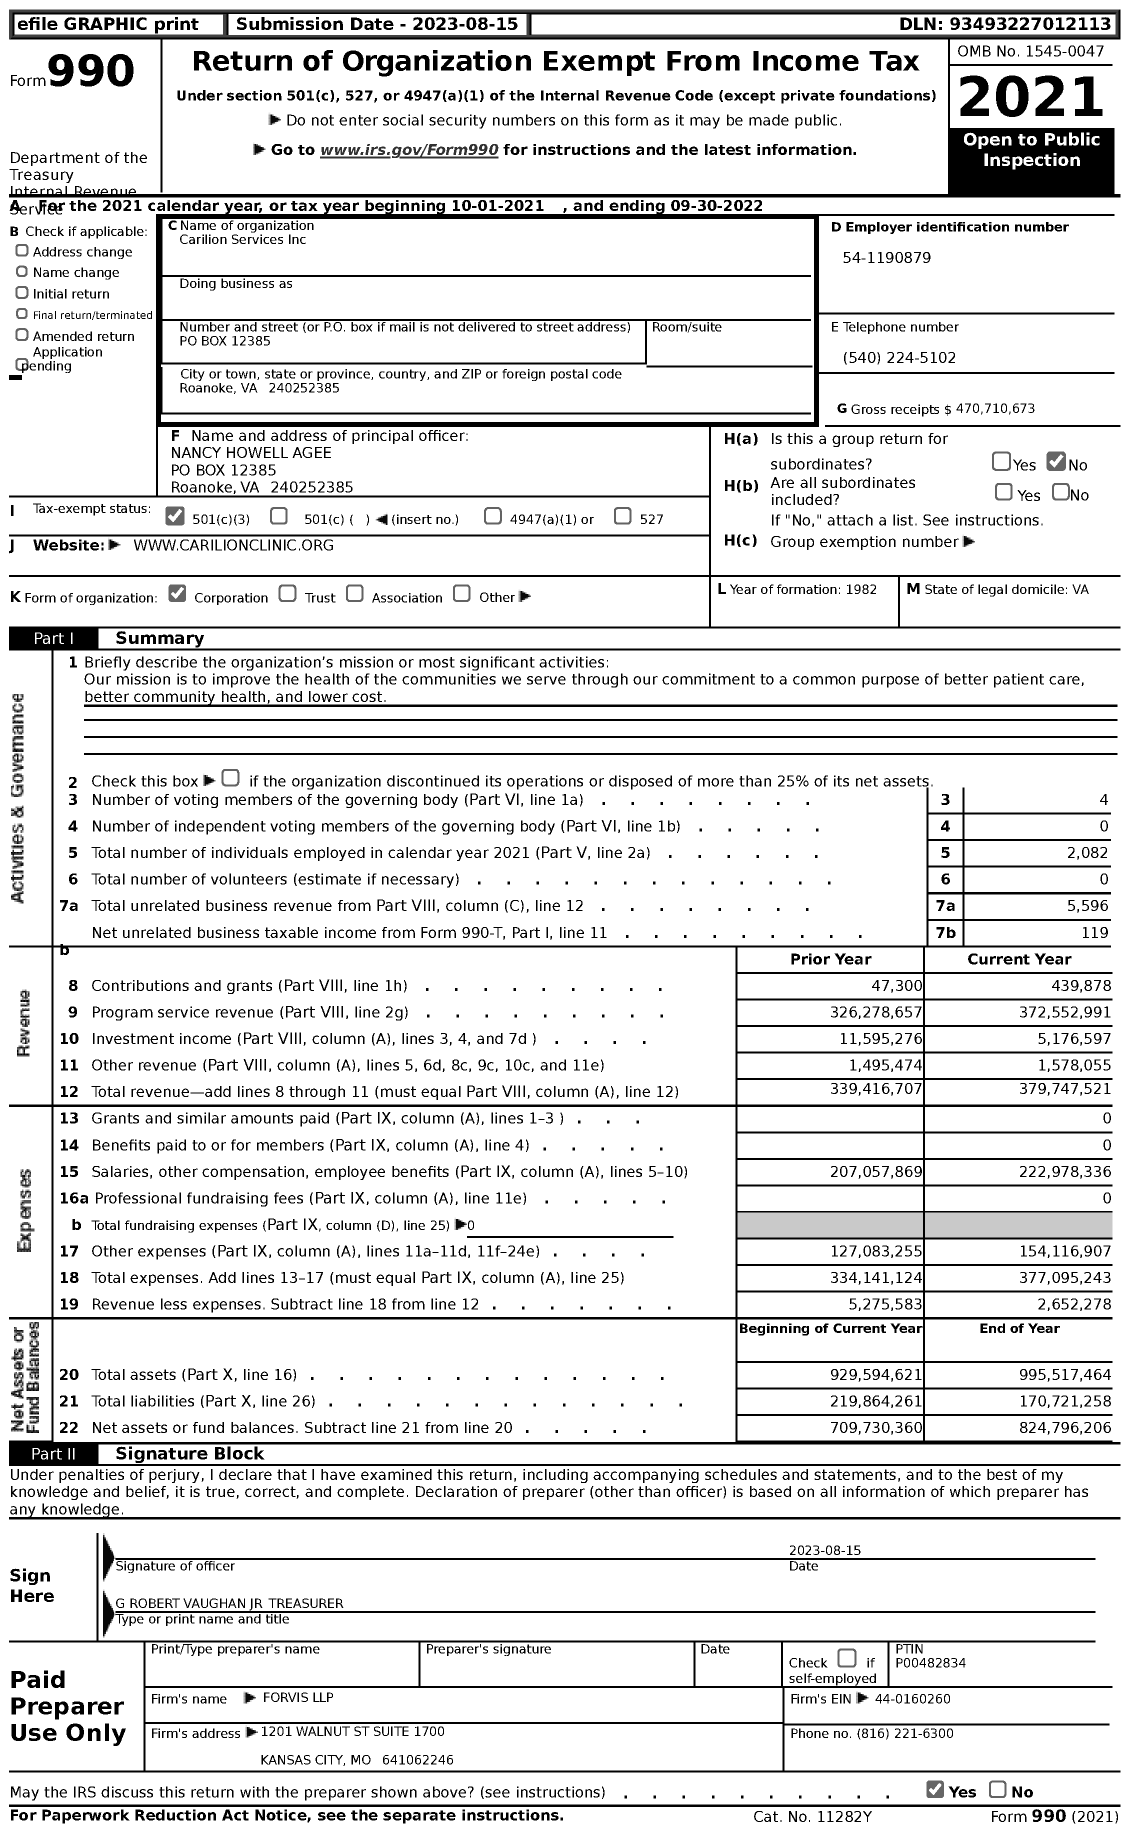 Image of first page of 2021 Form 990 for Carilion Services